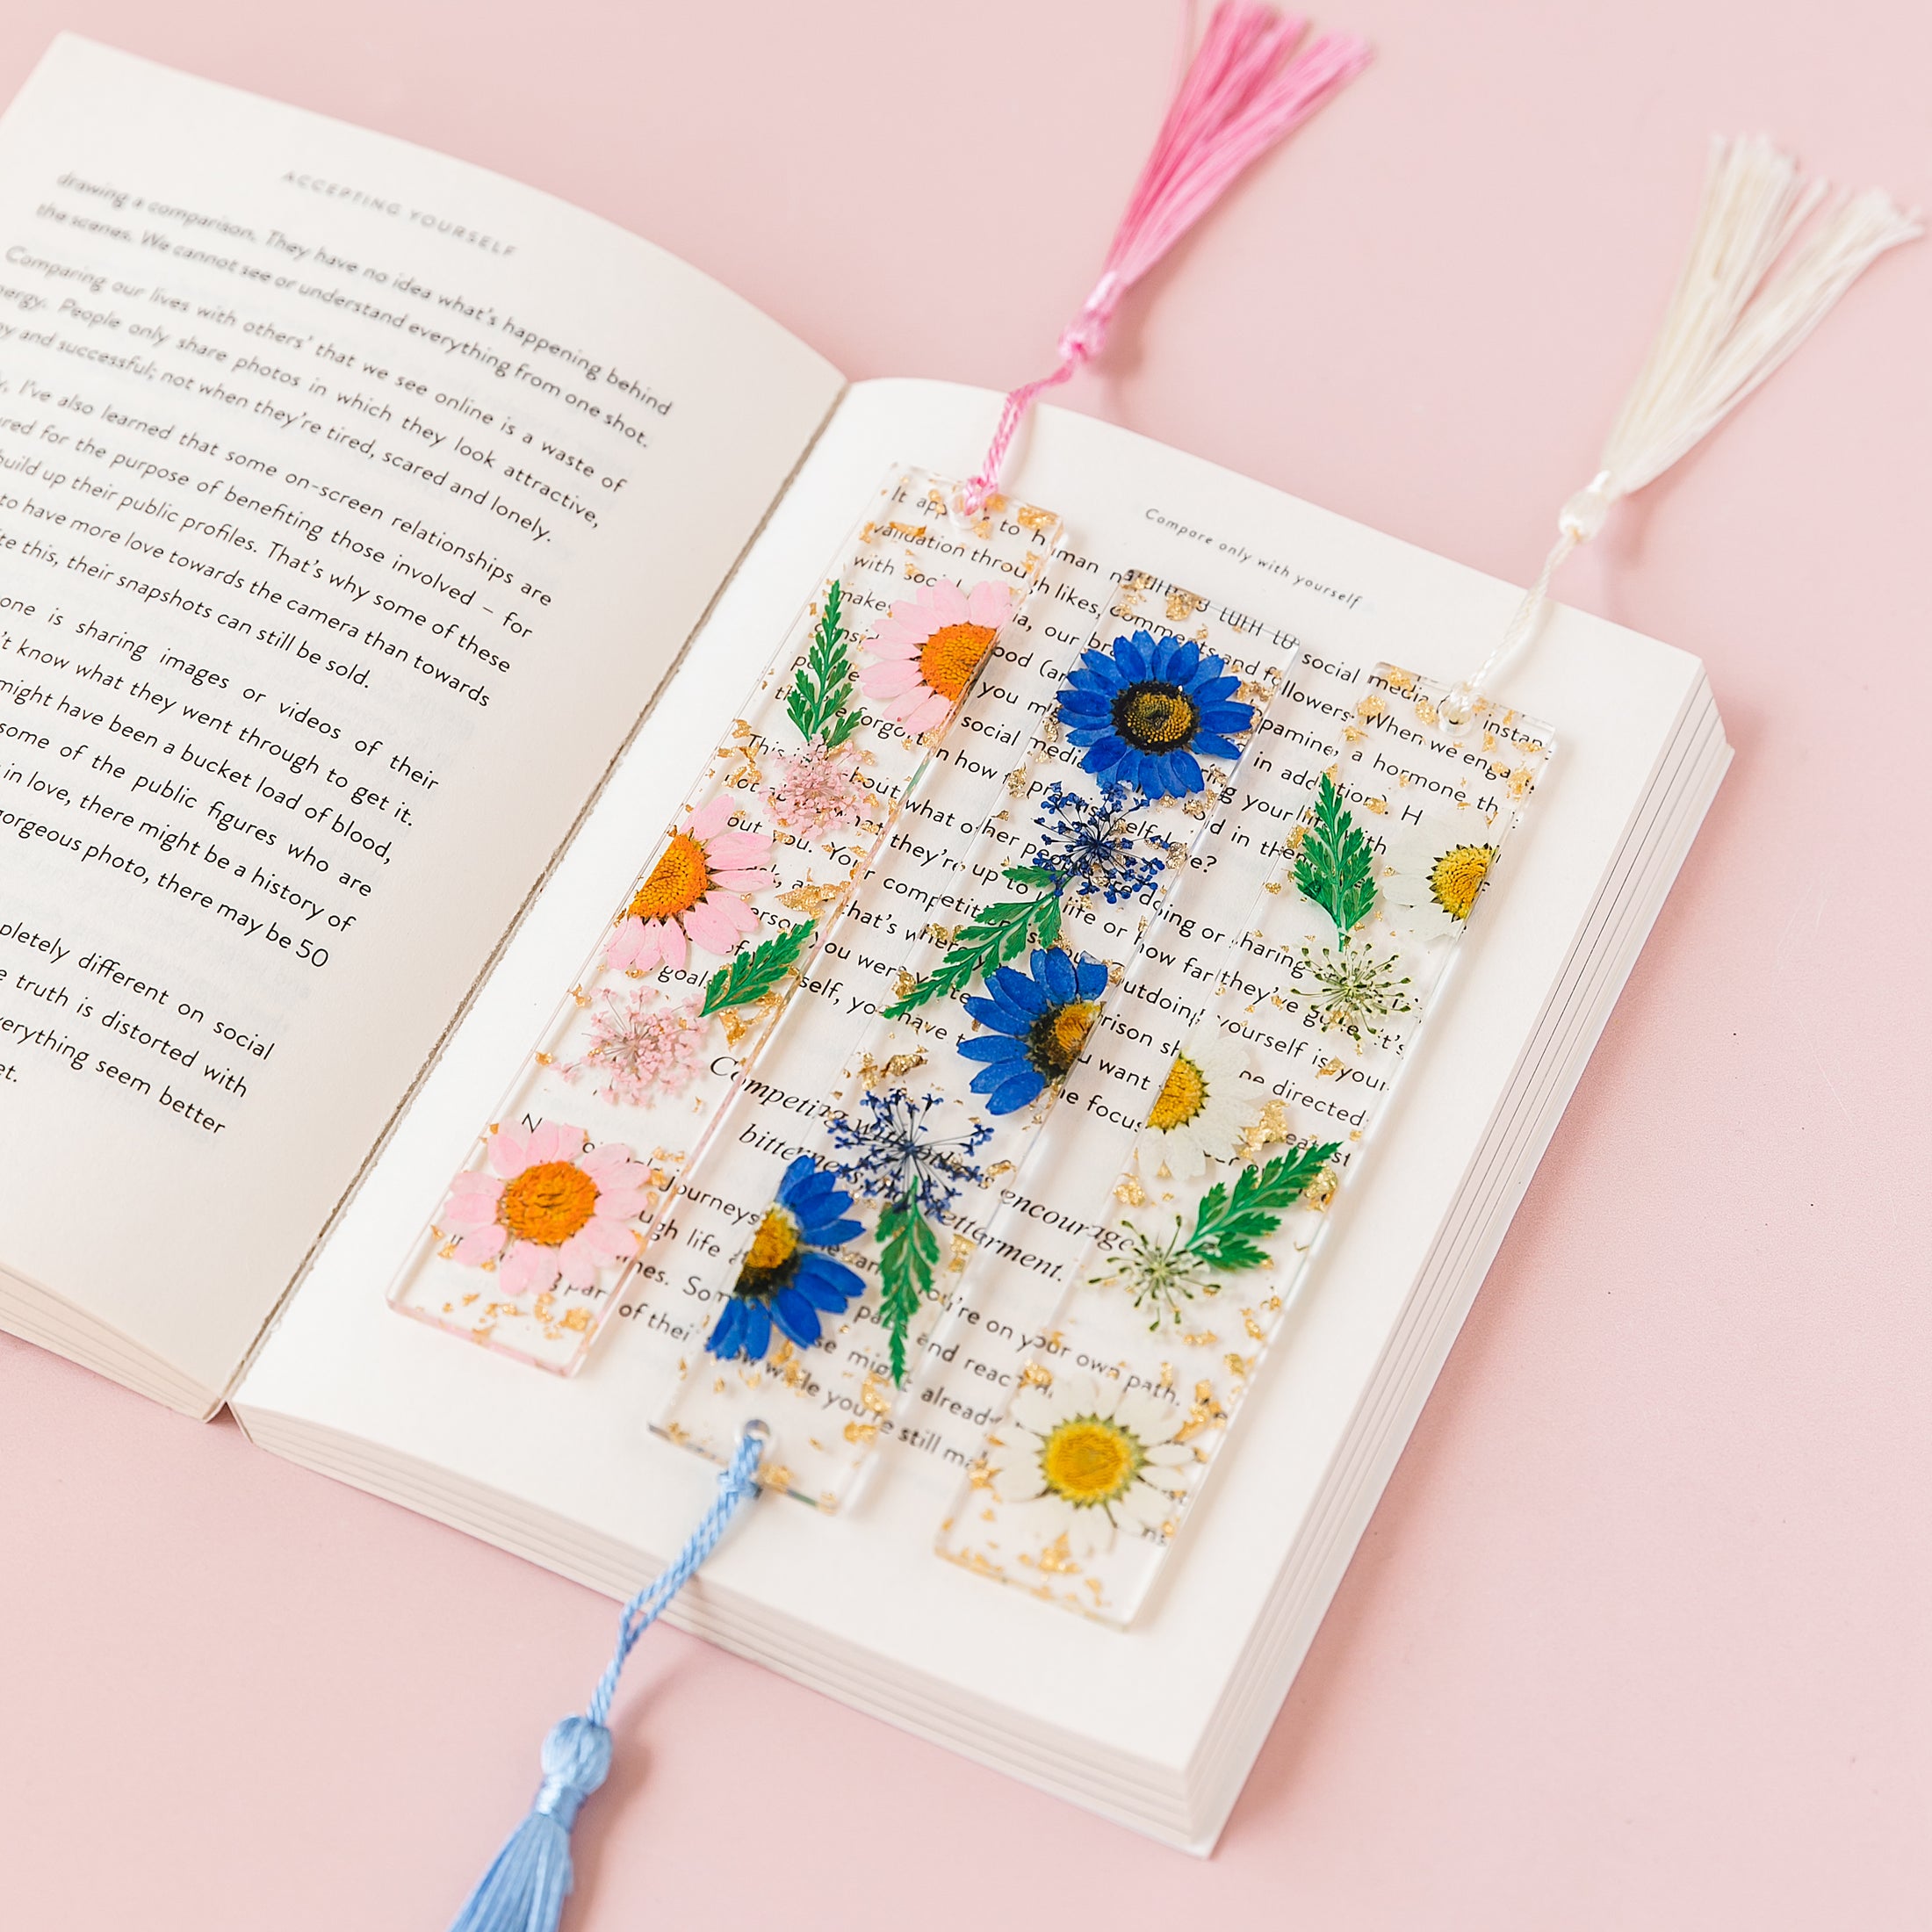 a book with a bookmark made out of flowers